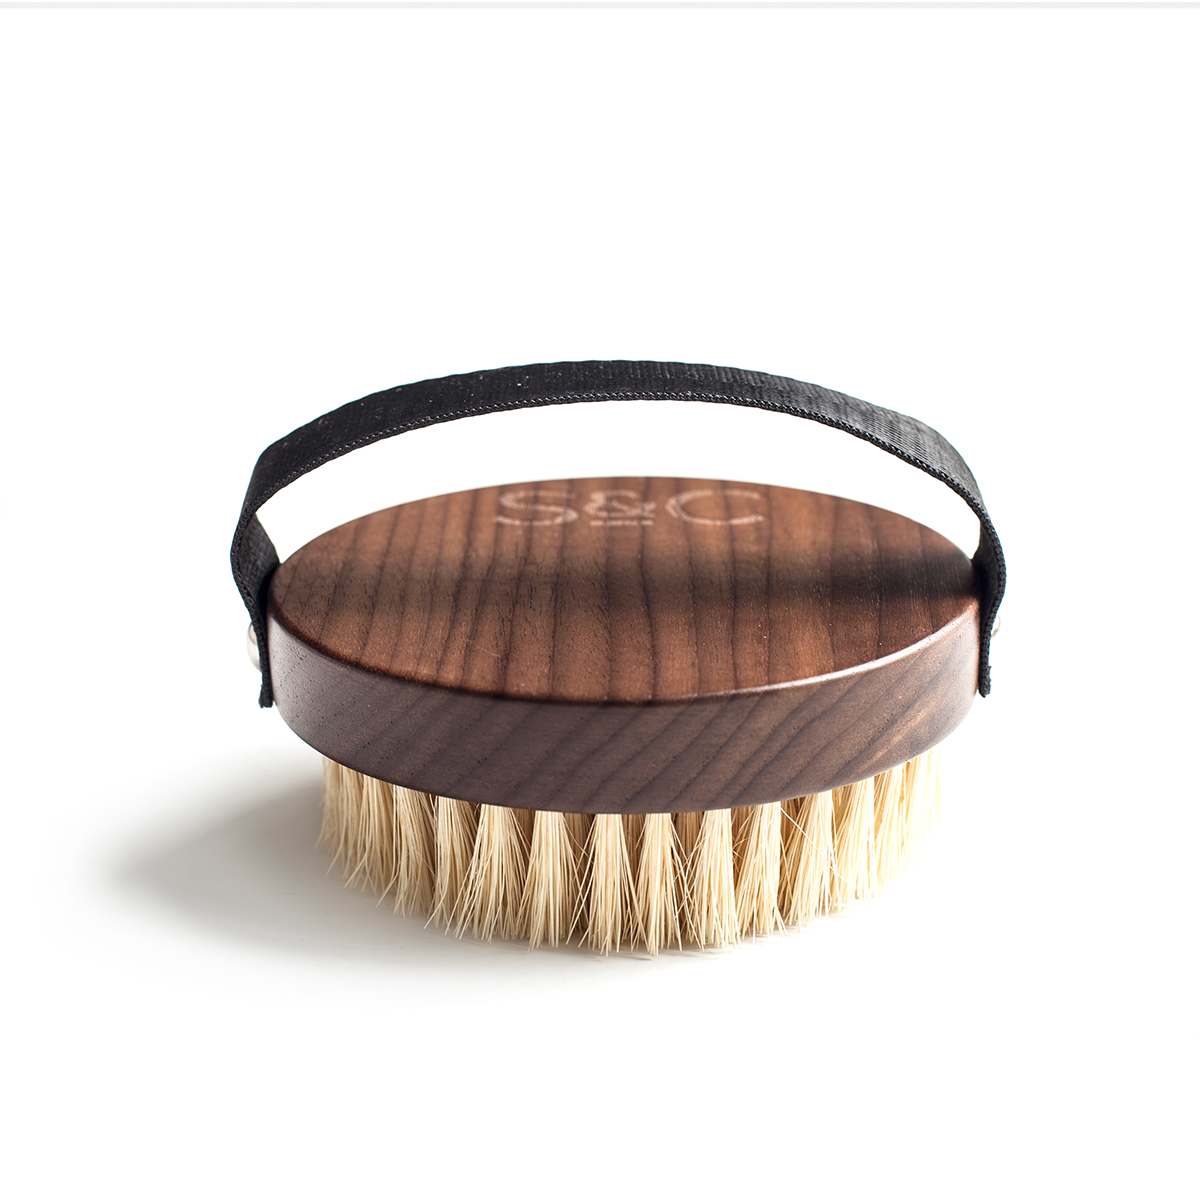 Luxurious Walnut Wood Dry Body Brush by Stass & Co: Round brush with black strap, natural sisal bristles, and handle. Close-up view showcasing bristles and logo detail.